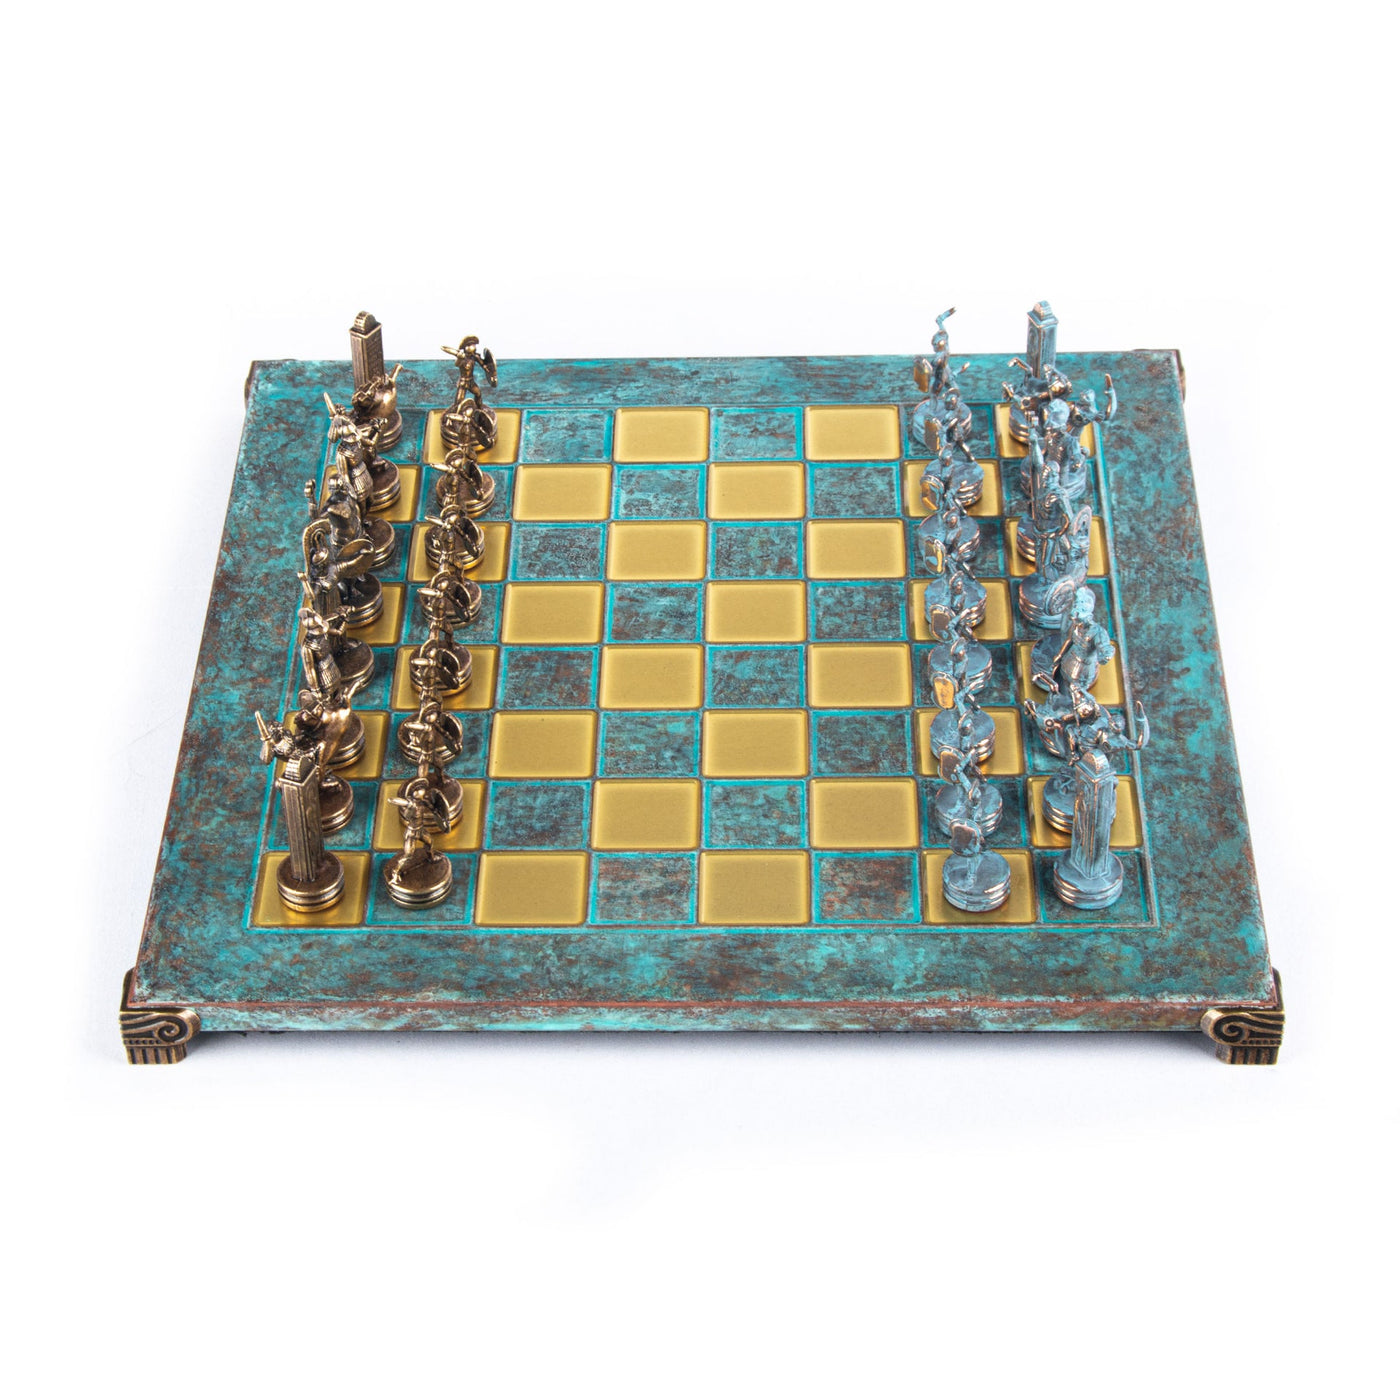 Greek Mythology Metal Chess set with Bronze and Blue Chessmen and 36cm Chessboard in Blue